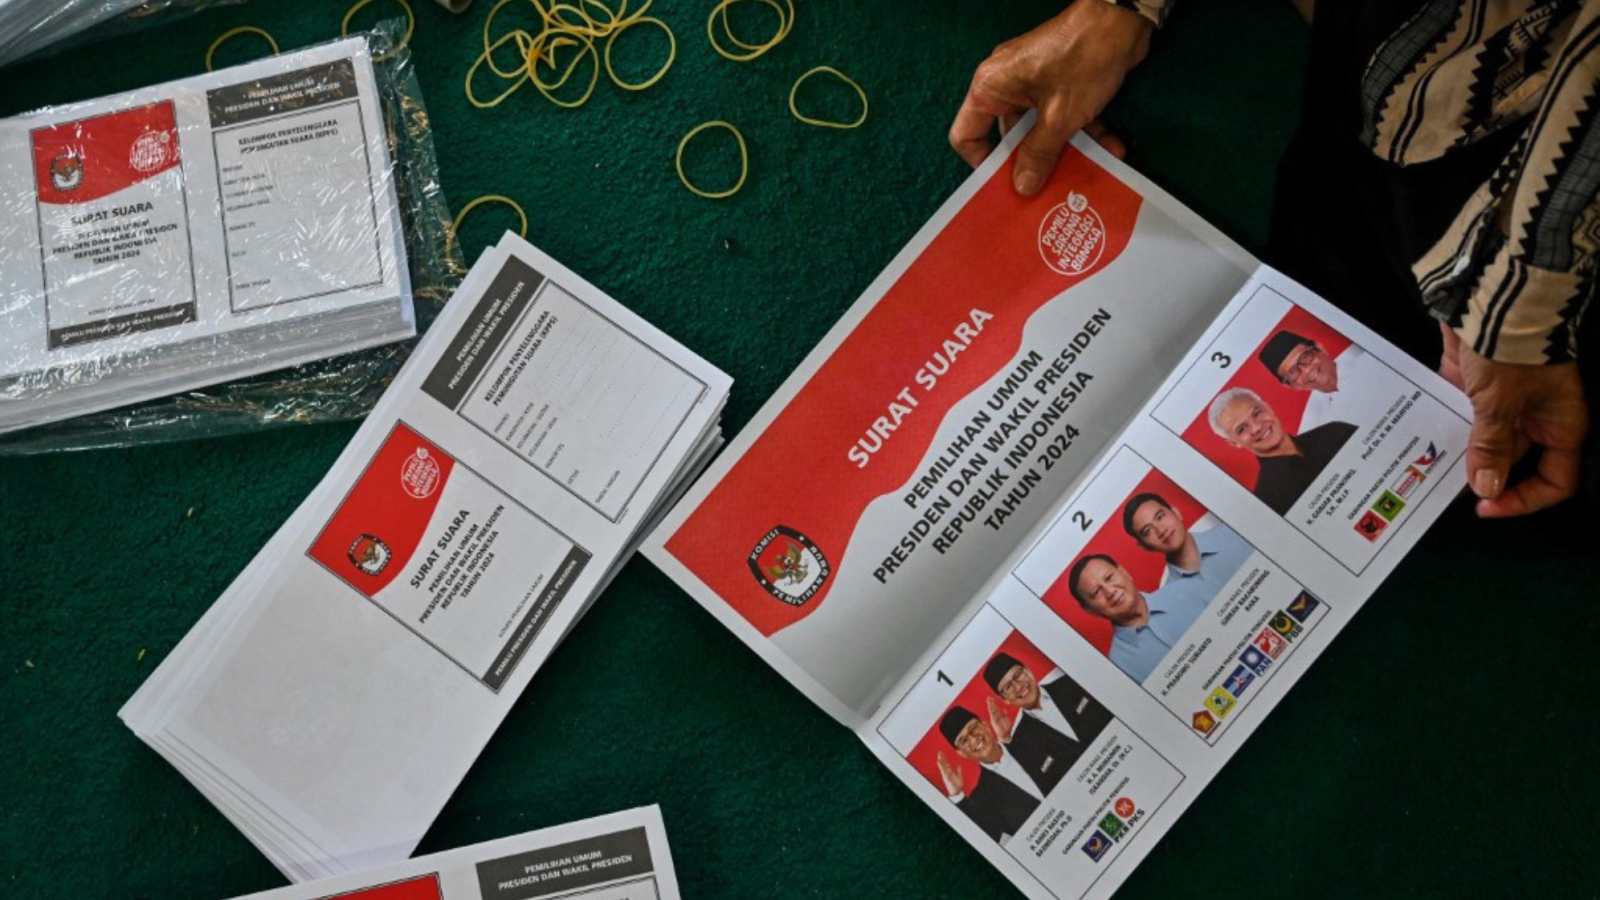 Pictured are the ballot papers for the presidential election during the folding and sorting process. Photo Credit Chaideer Mahyuddin, Associated Free Press.